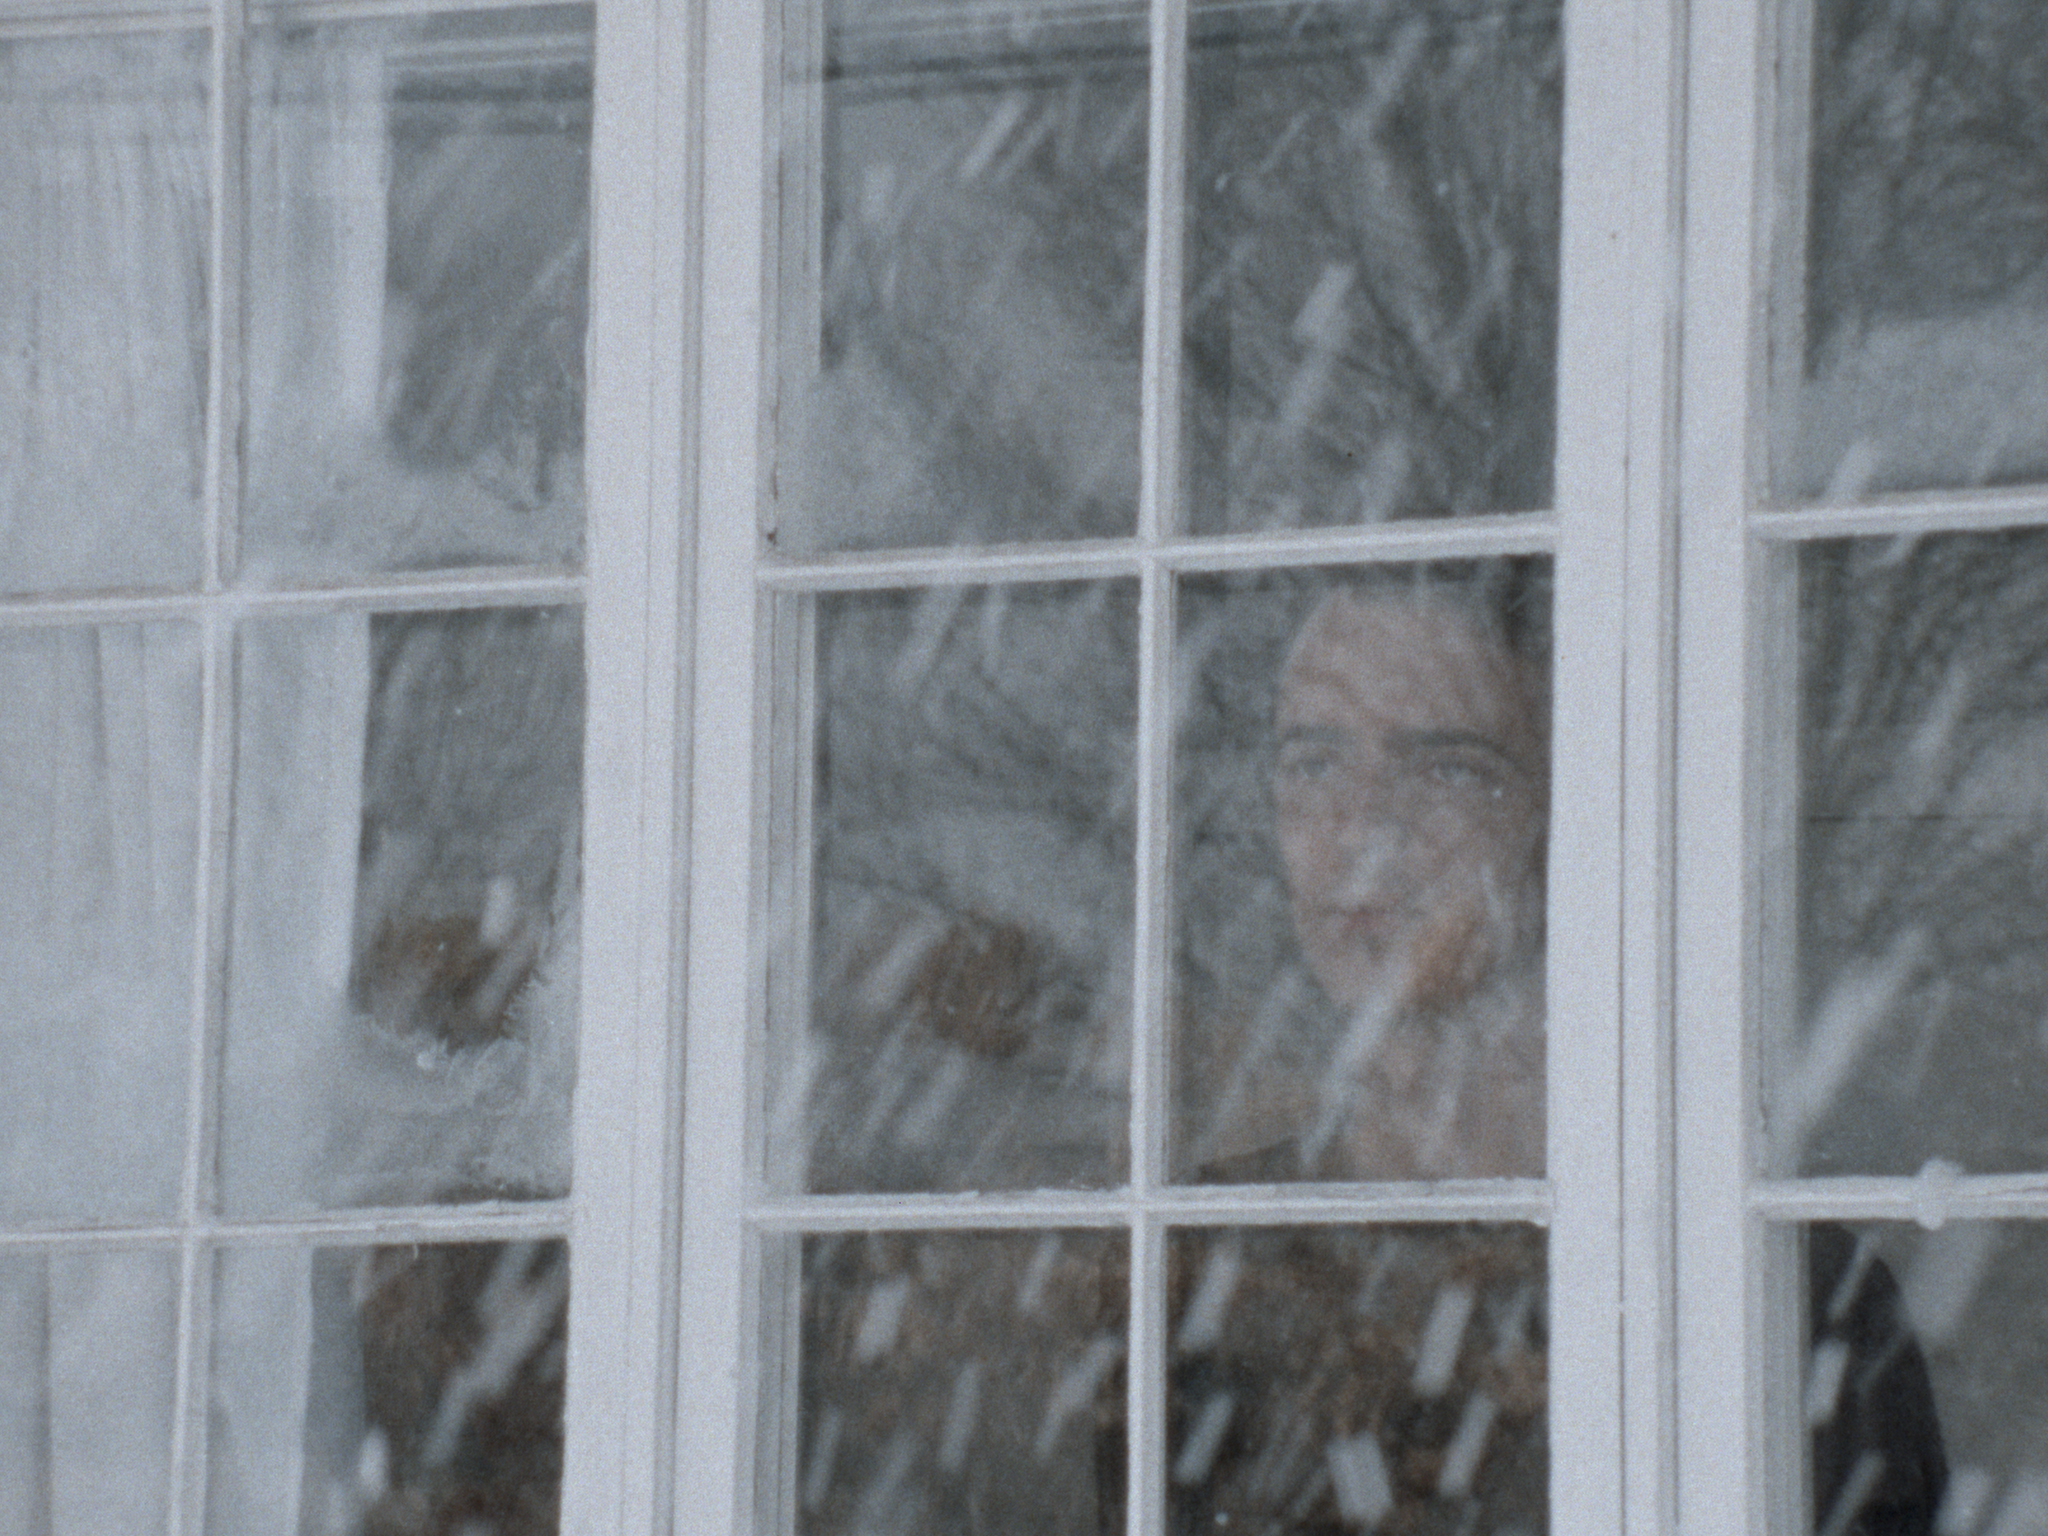 A Moment Is Enough scene still of protagonist looking at snow through window.